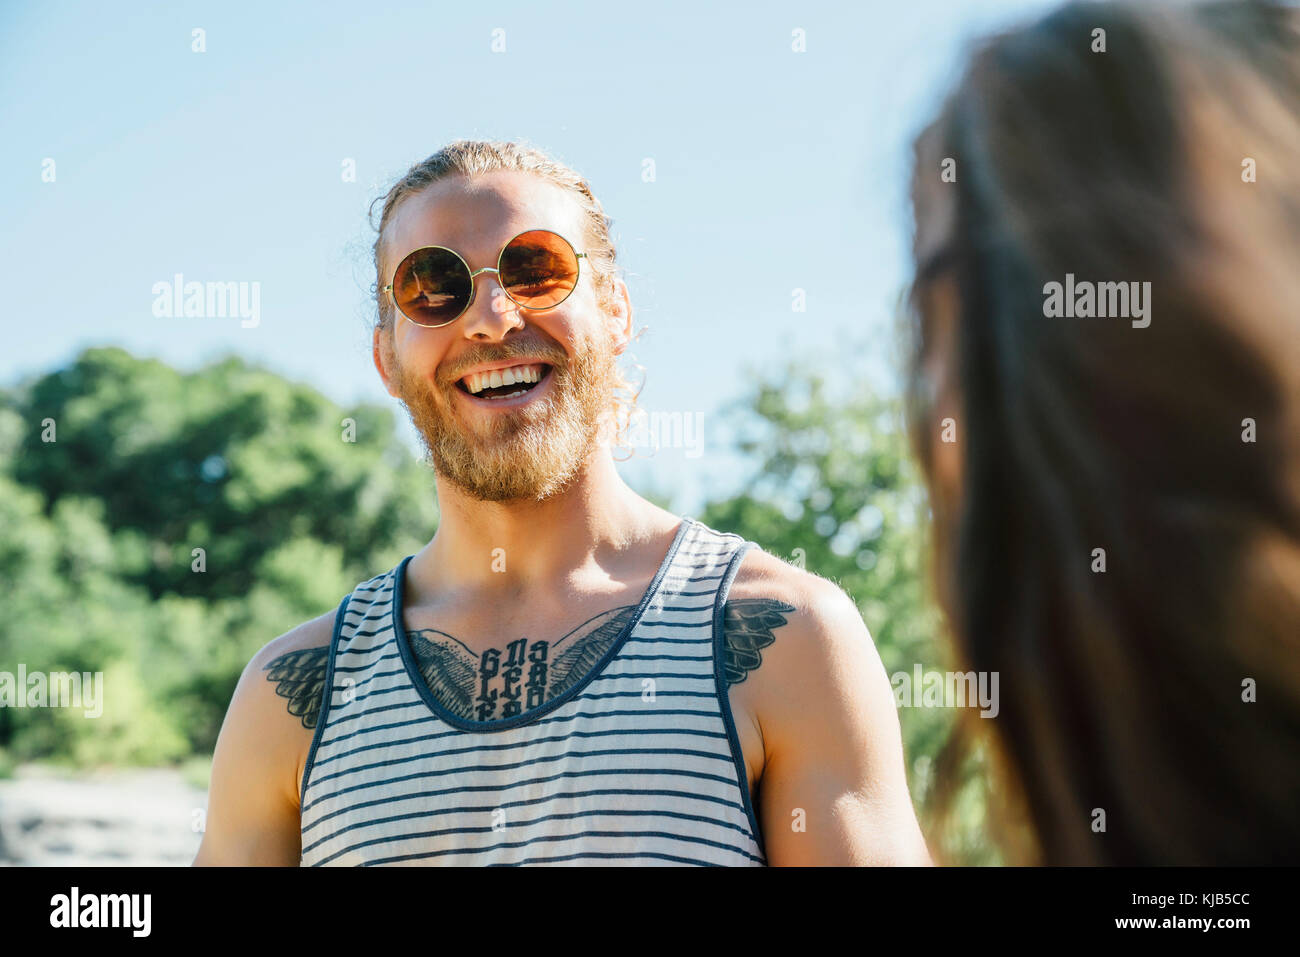 Caucasian man with chest tattoo laughing outdoors Stock Photo